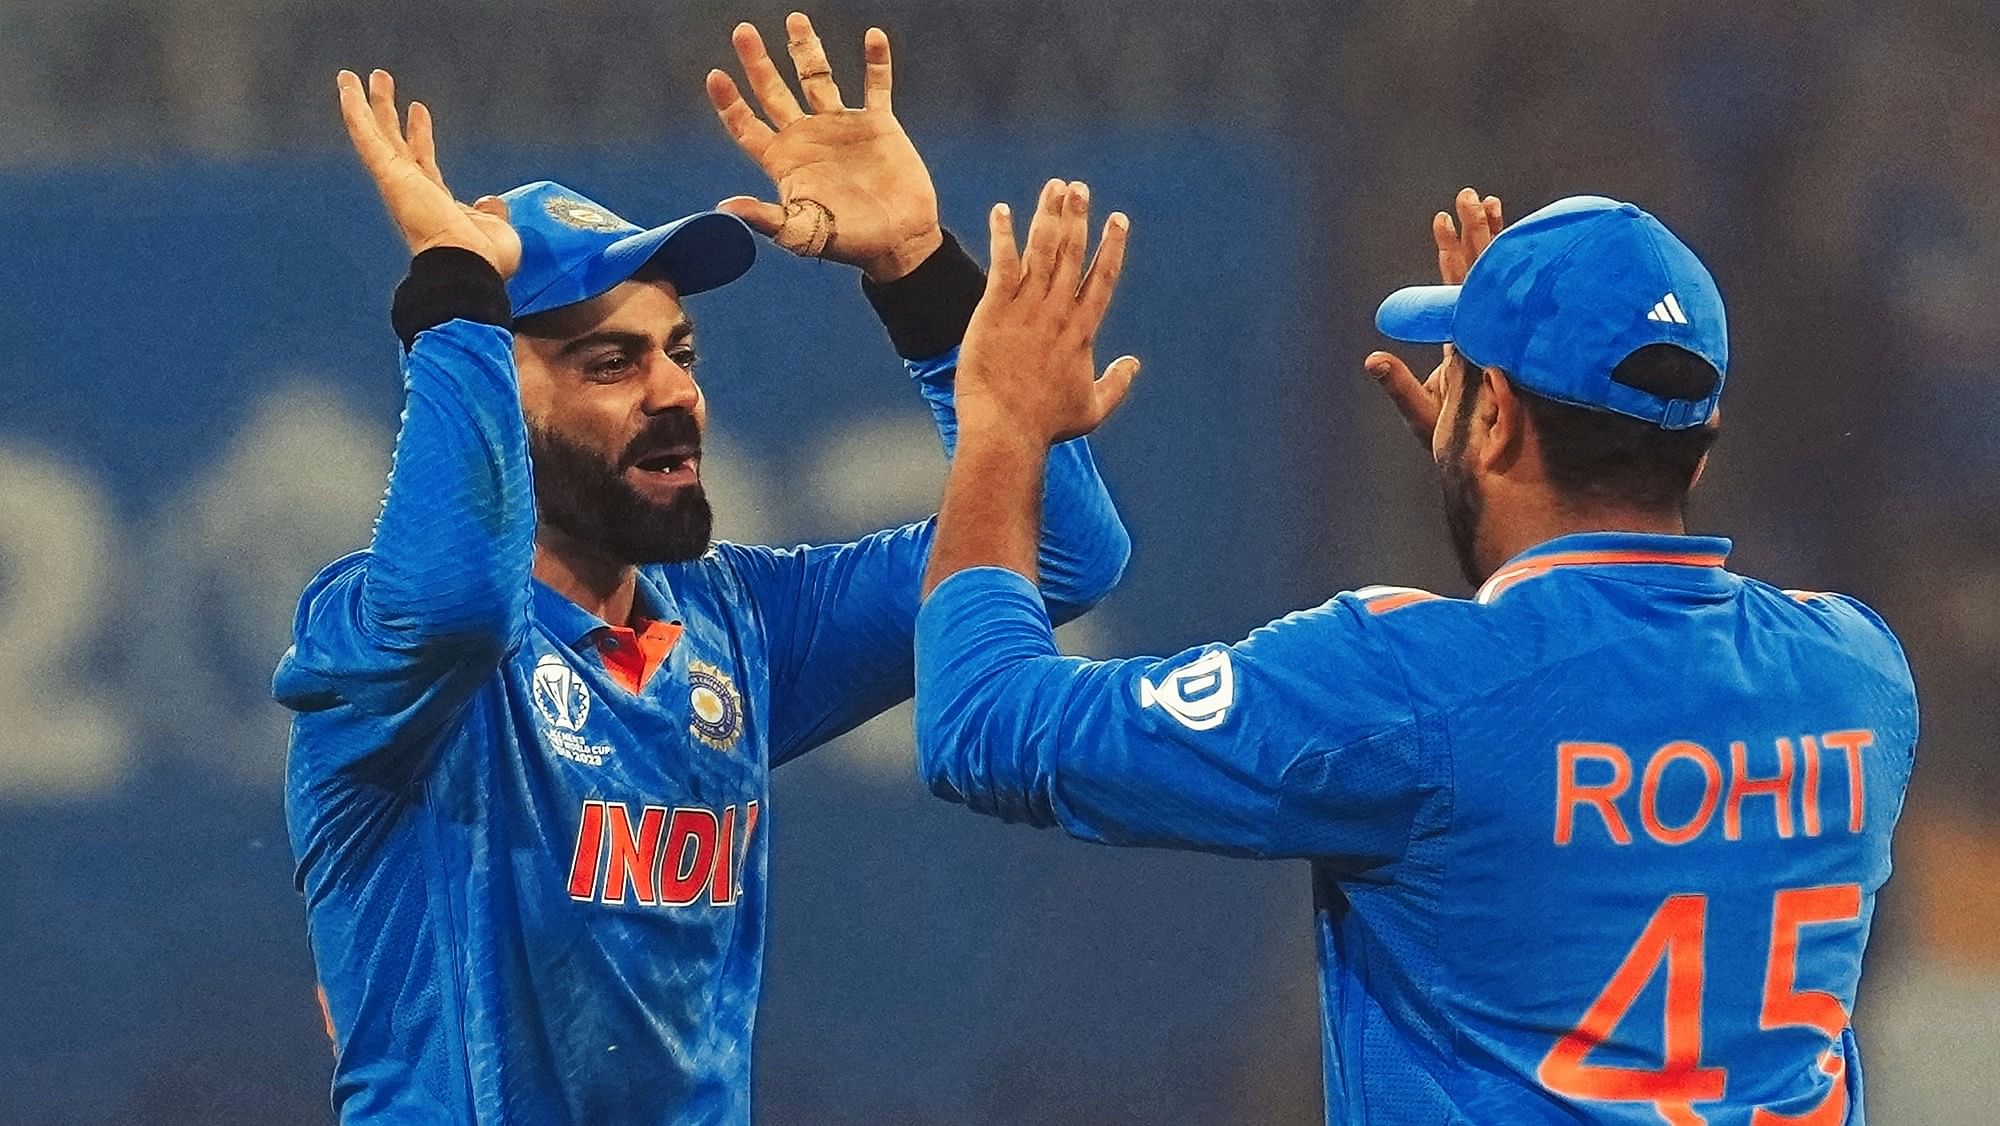 <div class="paragraphs"><p>India vs Afghanistan: India named the squad for three-match T20I series against Aghanistan, with Virat Kohli &amp; Rohit Sharma making their comebacks.</p></div>